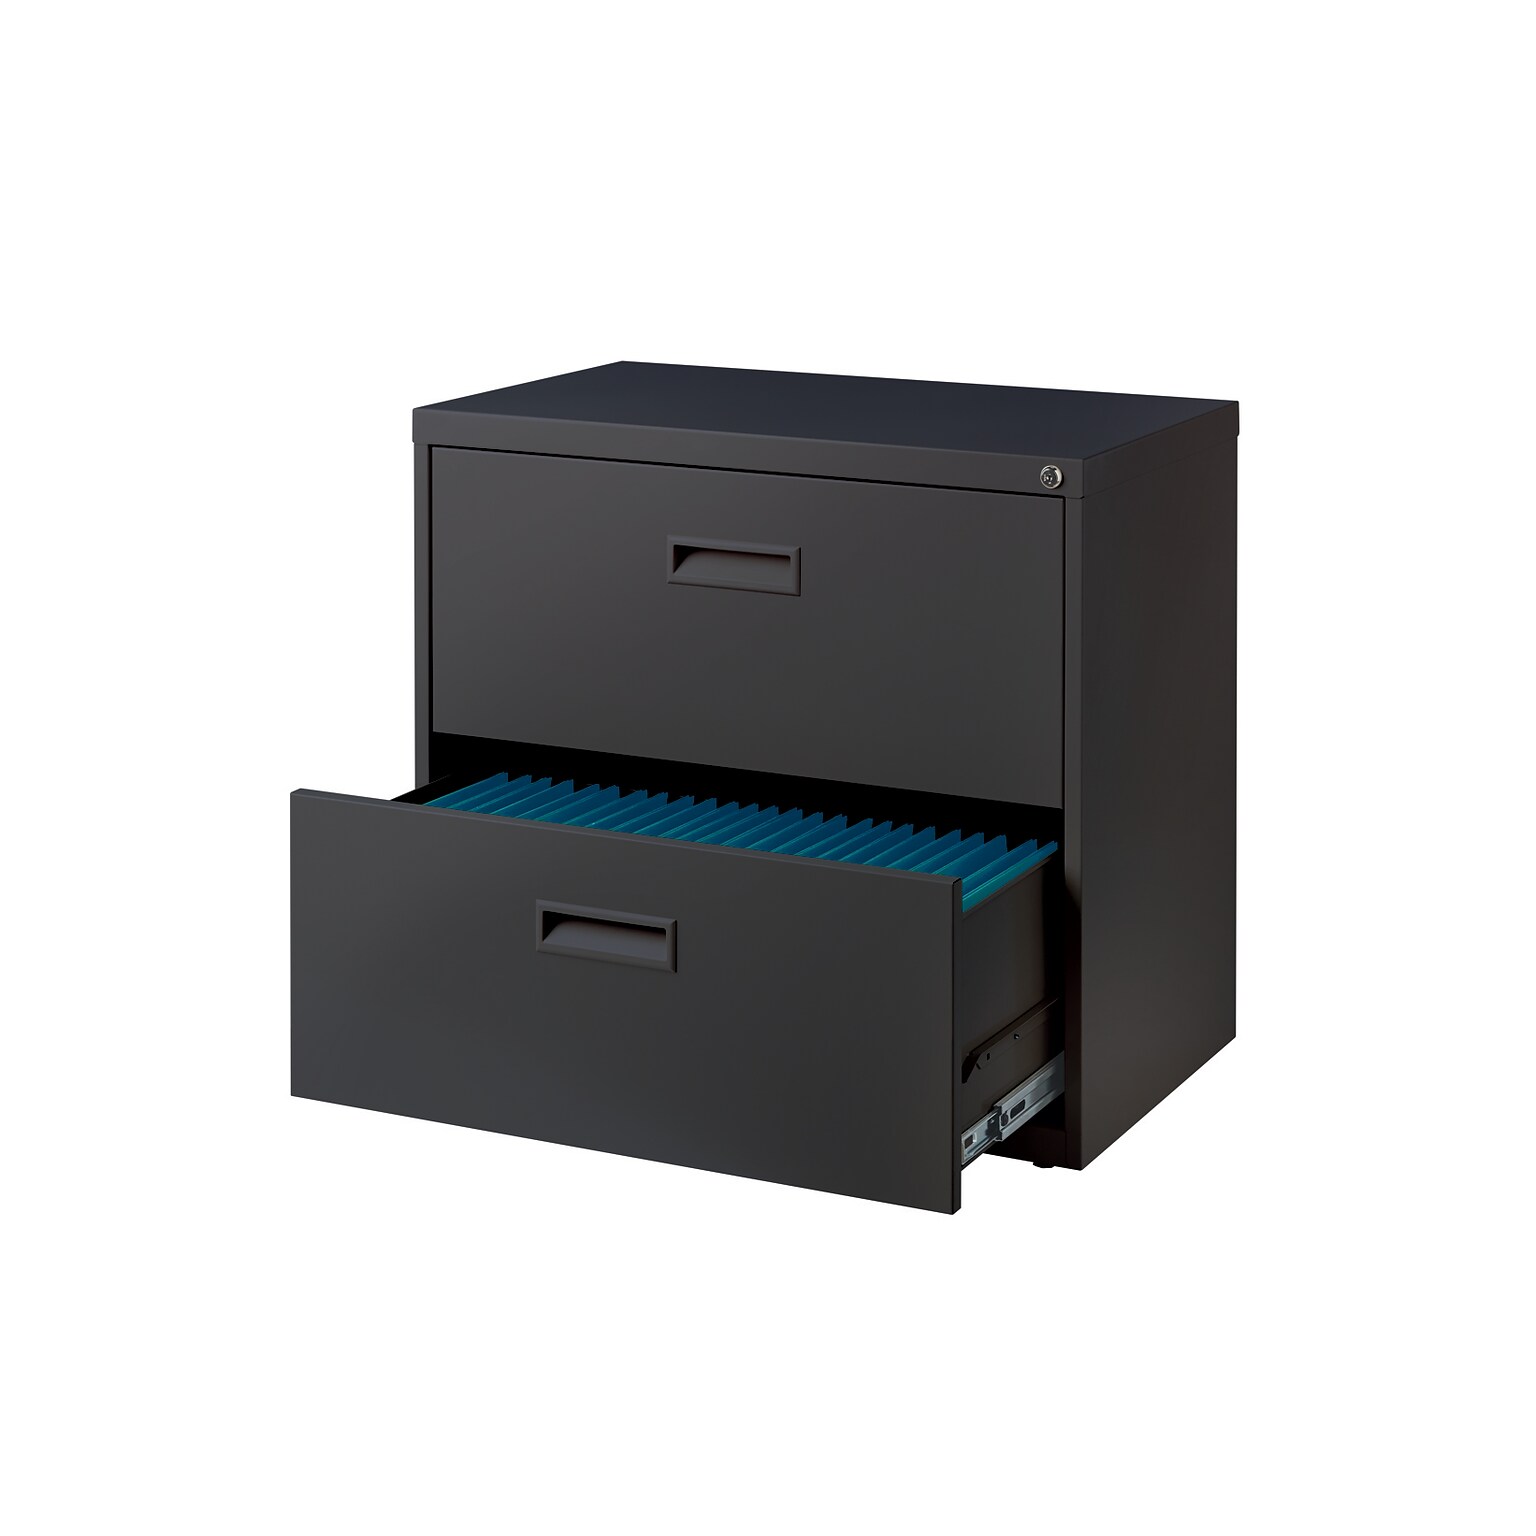 Space Solutions 2-Drawer Lateral File Cabinet, Letter-Width, Charcoal, 30 Wide (20228)